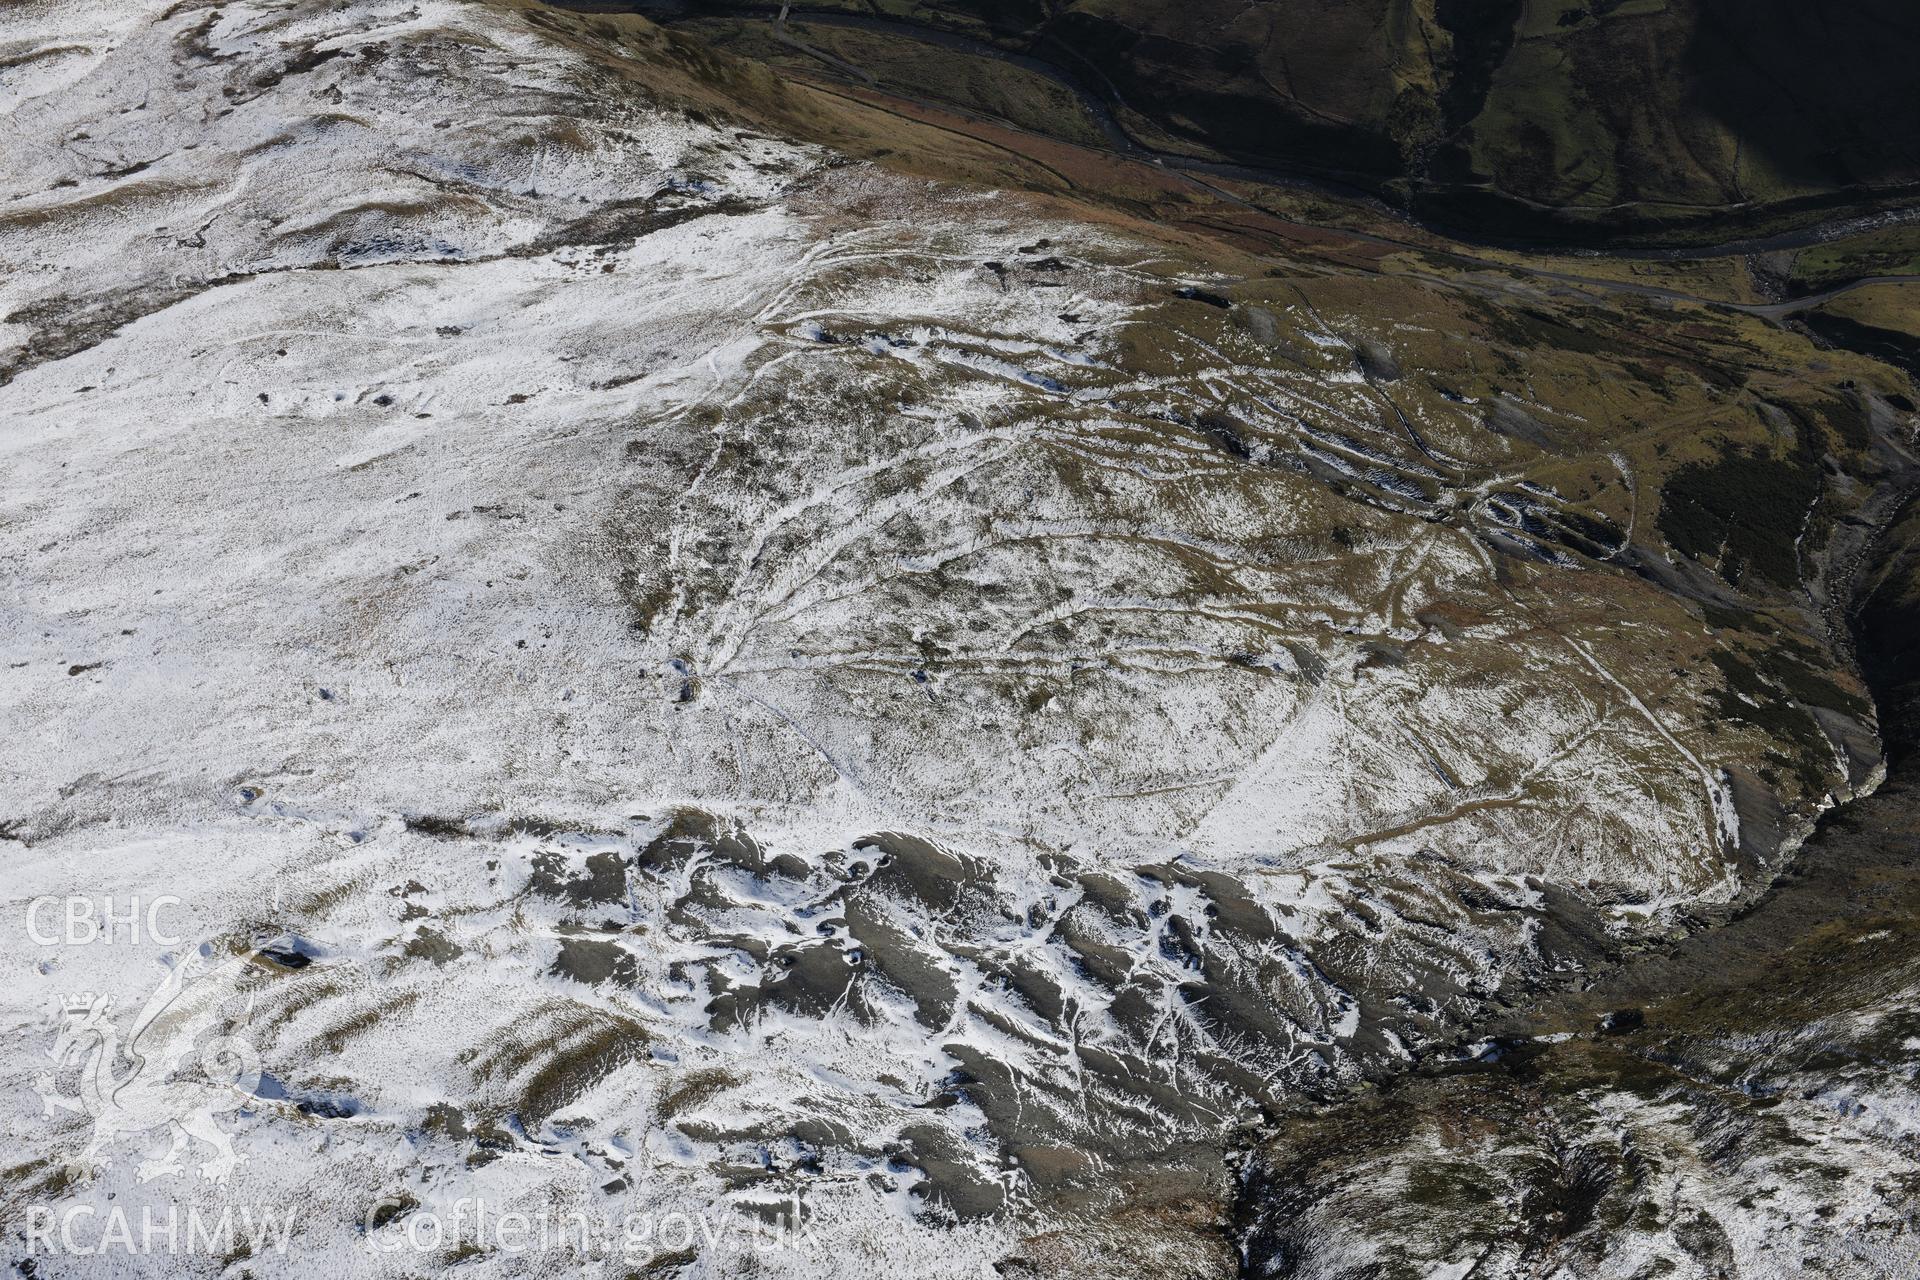 Former Copa Hill opencast mine, Cwmystwyth, south west of Llangurig. Oblique aerial photograph taken during the Royal Commission's programme of archaeological aerial reconnaissance by Toby Driver on 4th February 2015.